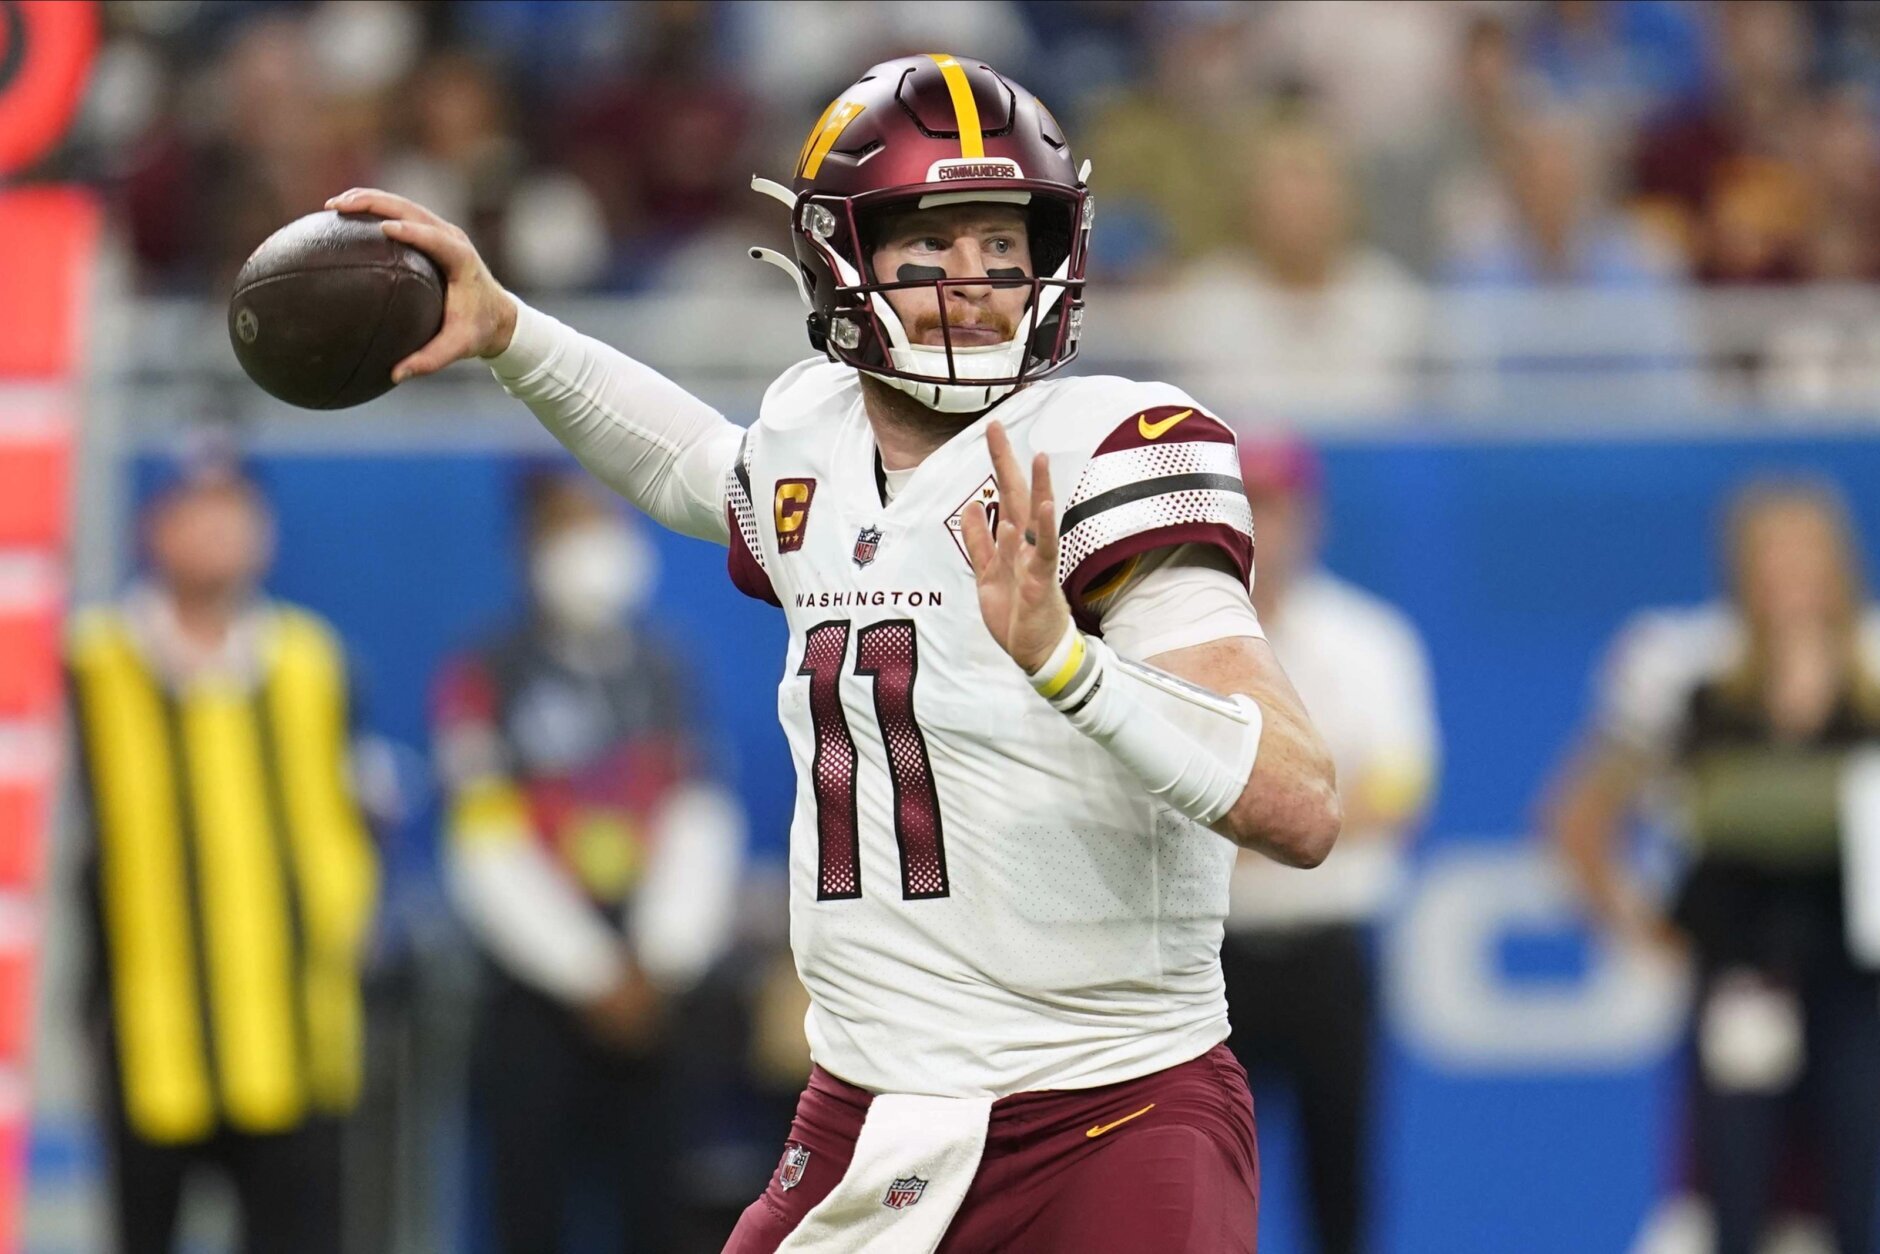 Washington visits Detroit in matchup of top picks from 2016 NFL draft: Lions'  Jared Goff and Commanders' Carson Wentz – The Virginian-Pilot